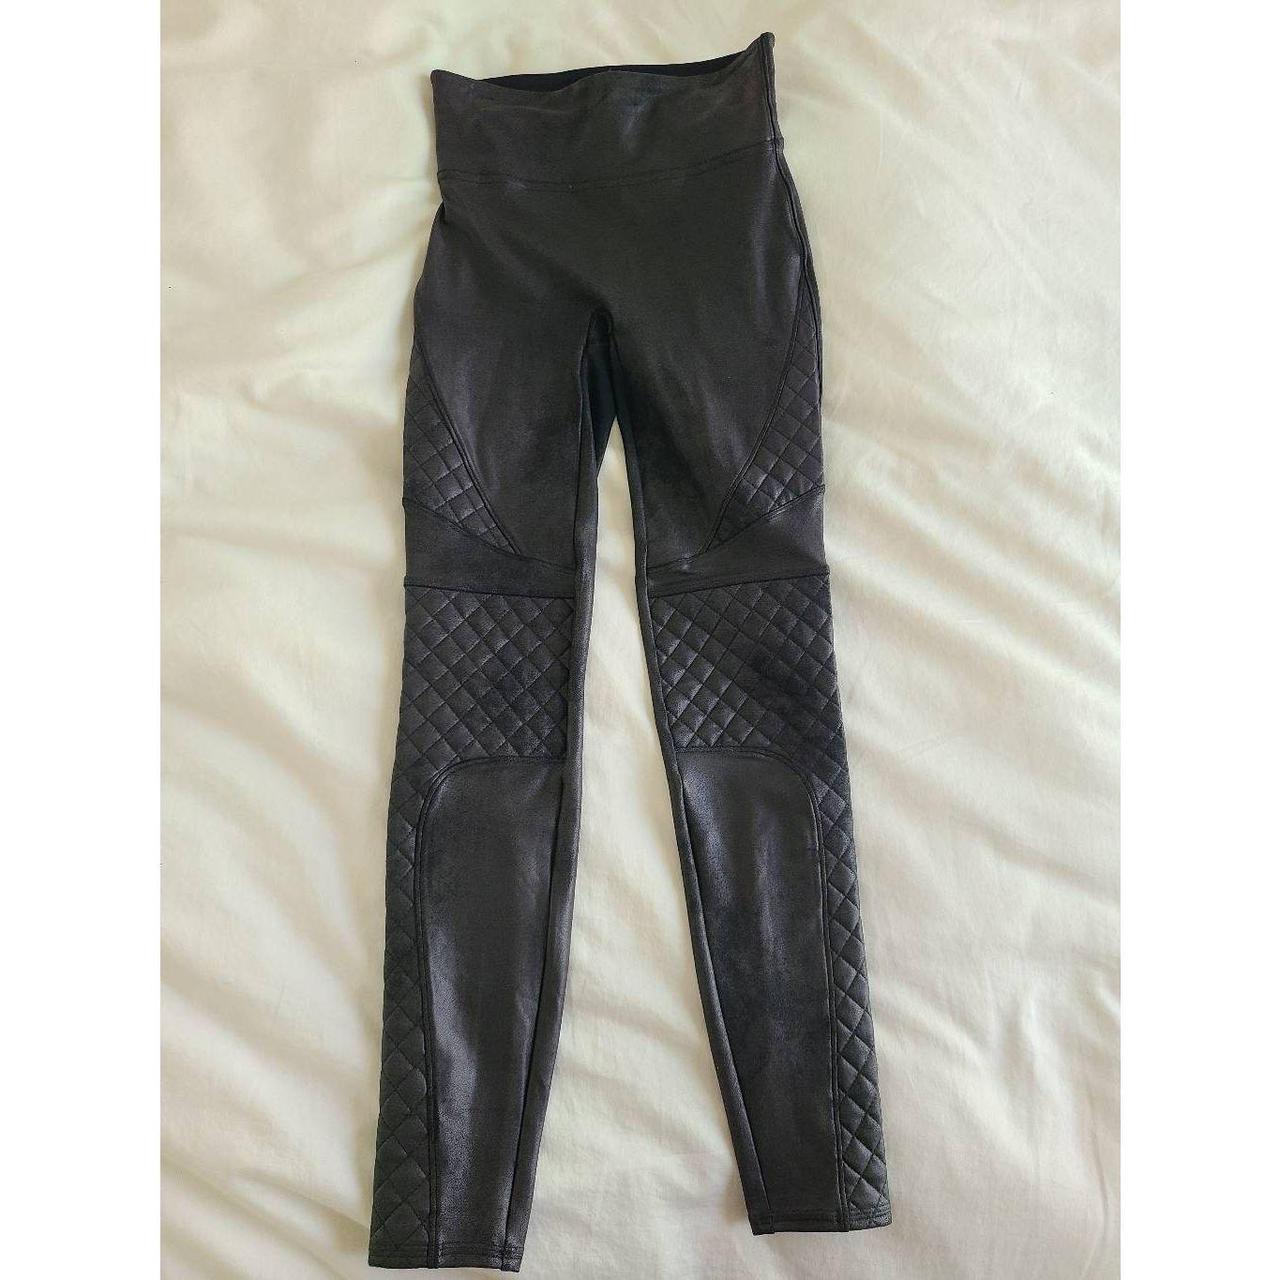 Spanx Quilted Faux Leather Legging Women's Size XS